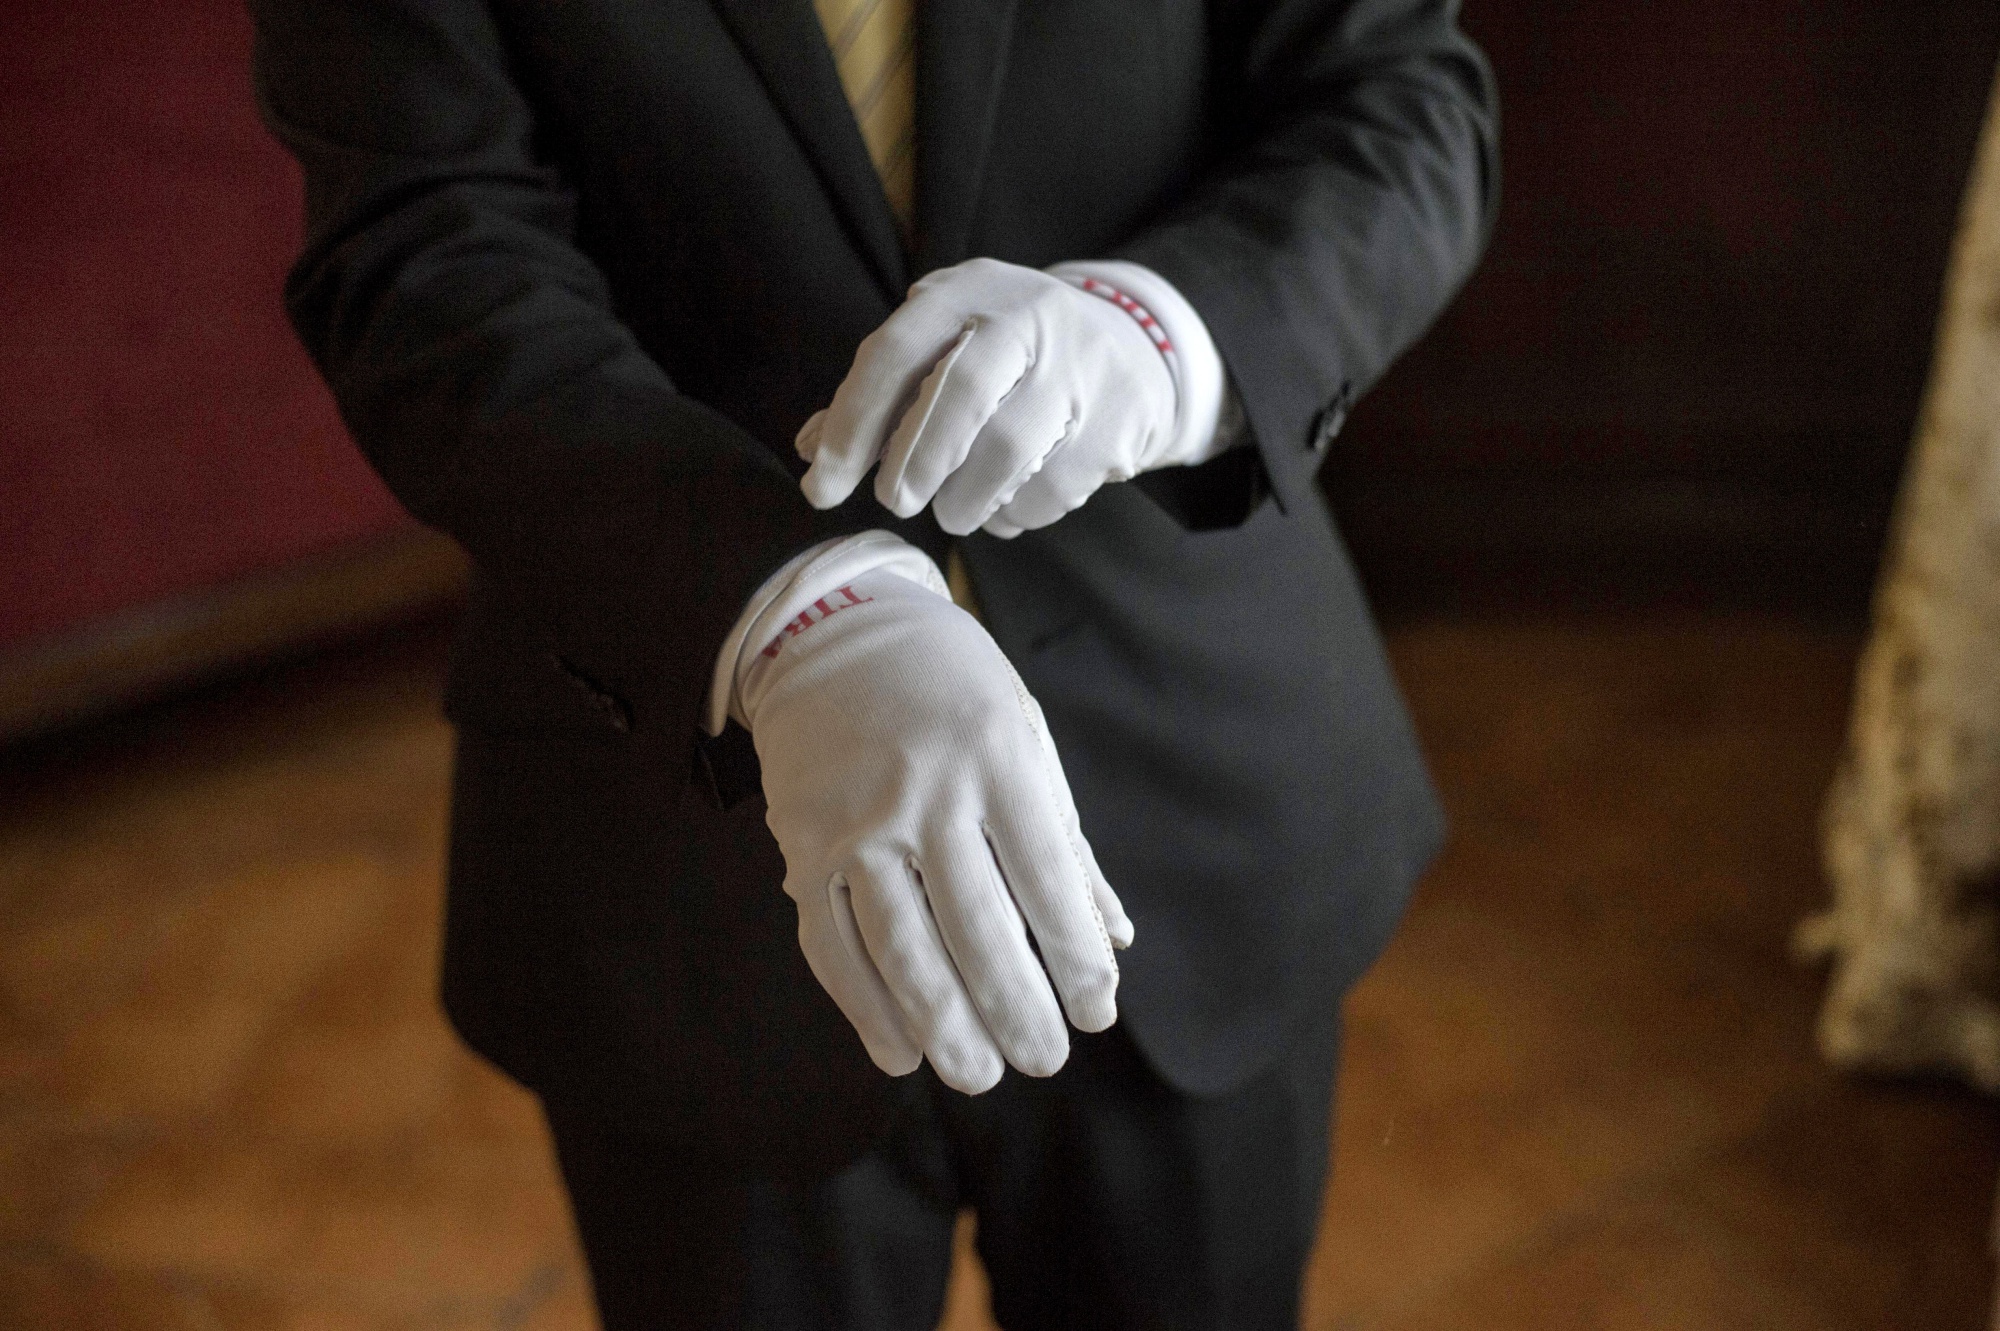 White glove service with a touch of style - EUROPE - Chinadaily.com.cn